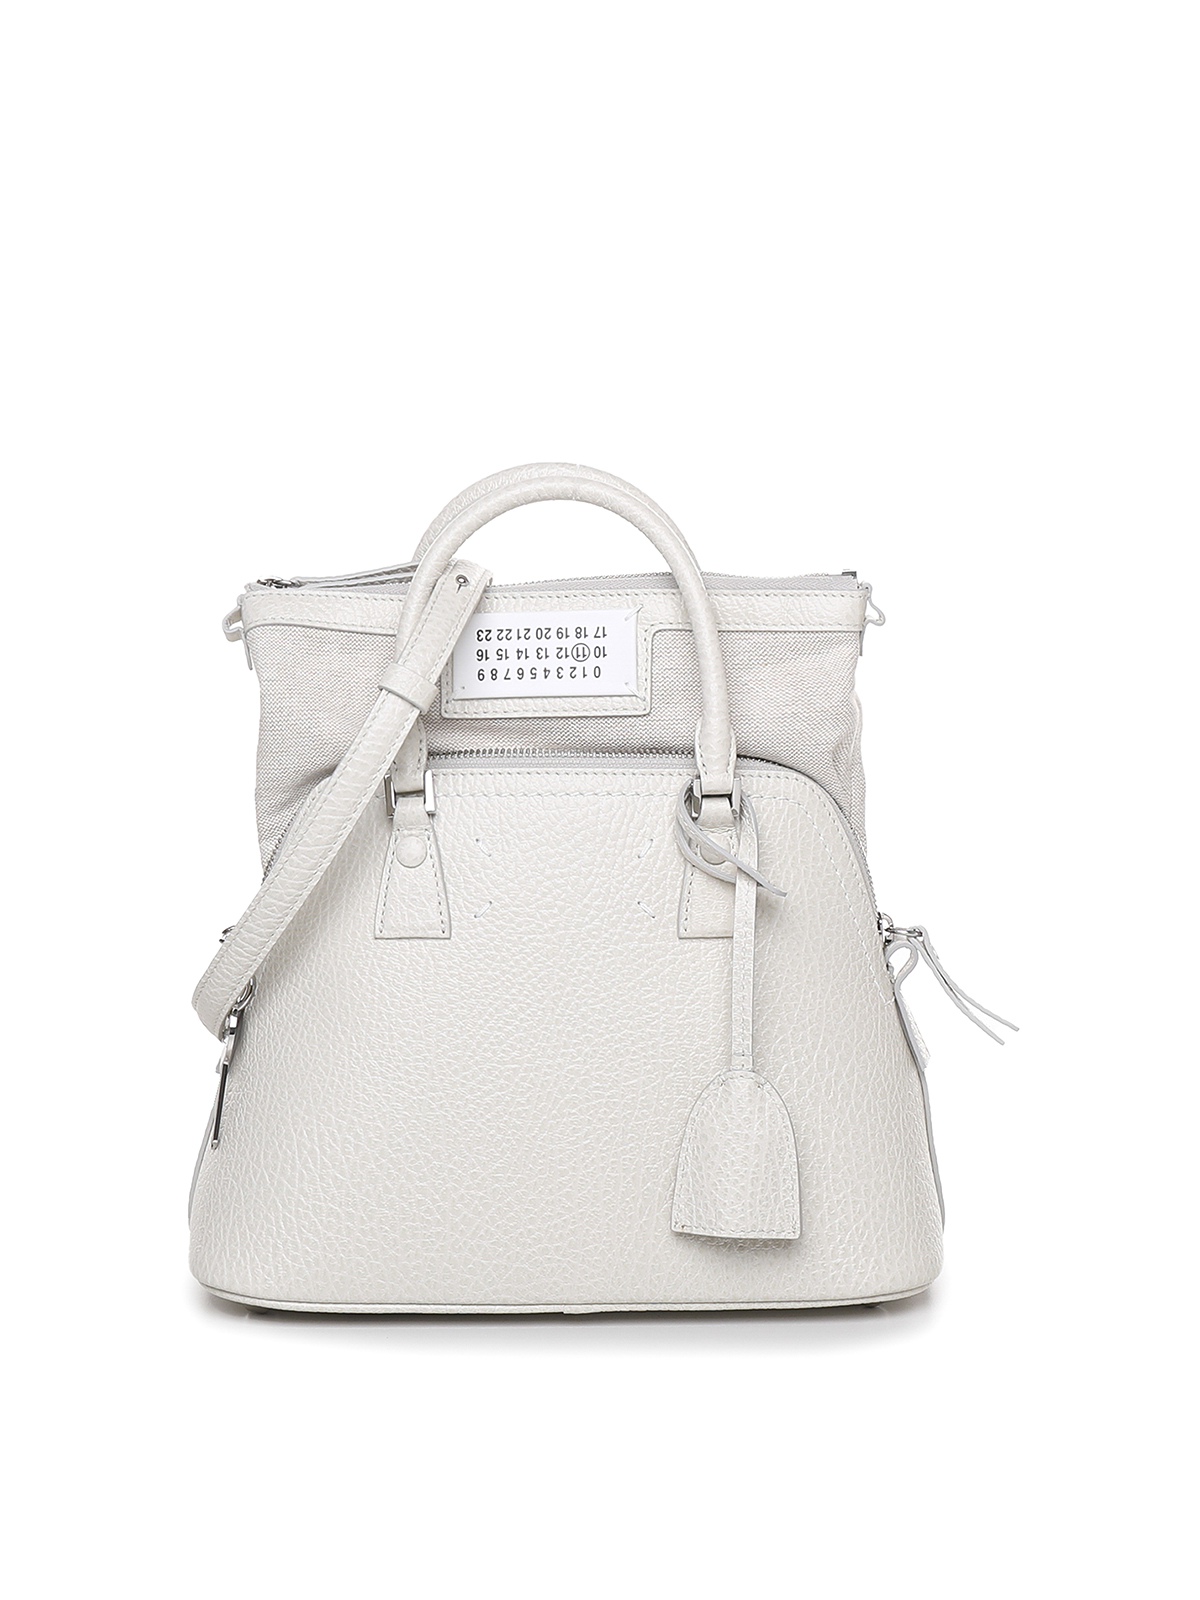 Maison Margiela Grained Leather Bag With Canvas Lining In Blanco